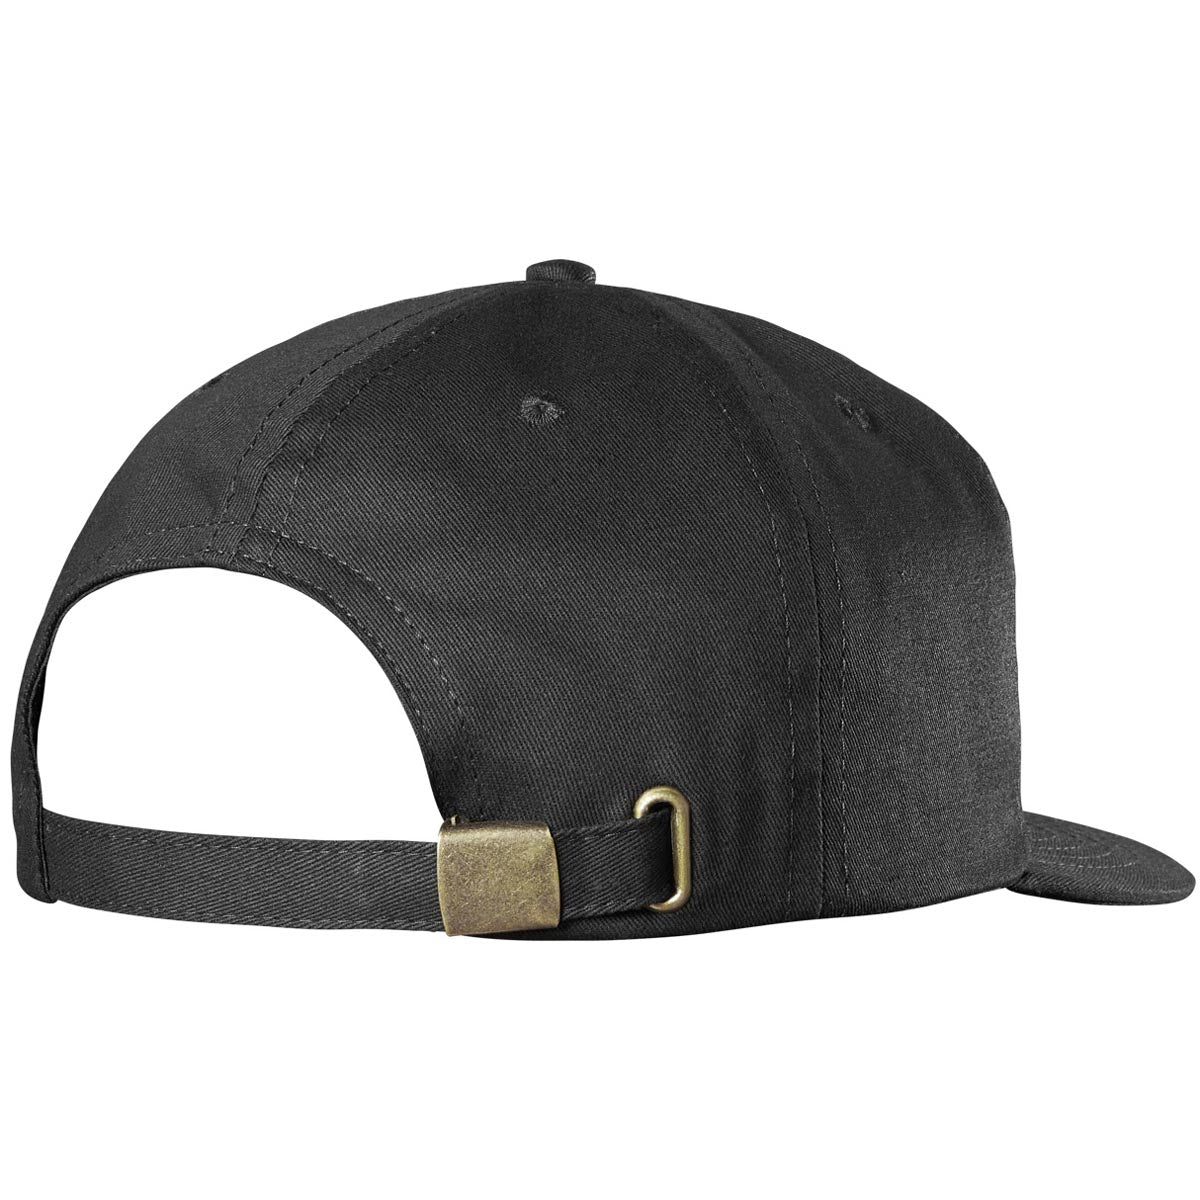 Emerica Pure Gold Dad Hat - Black/Green image 2